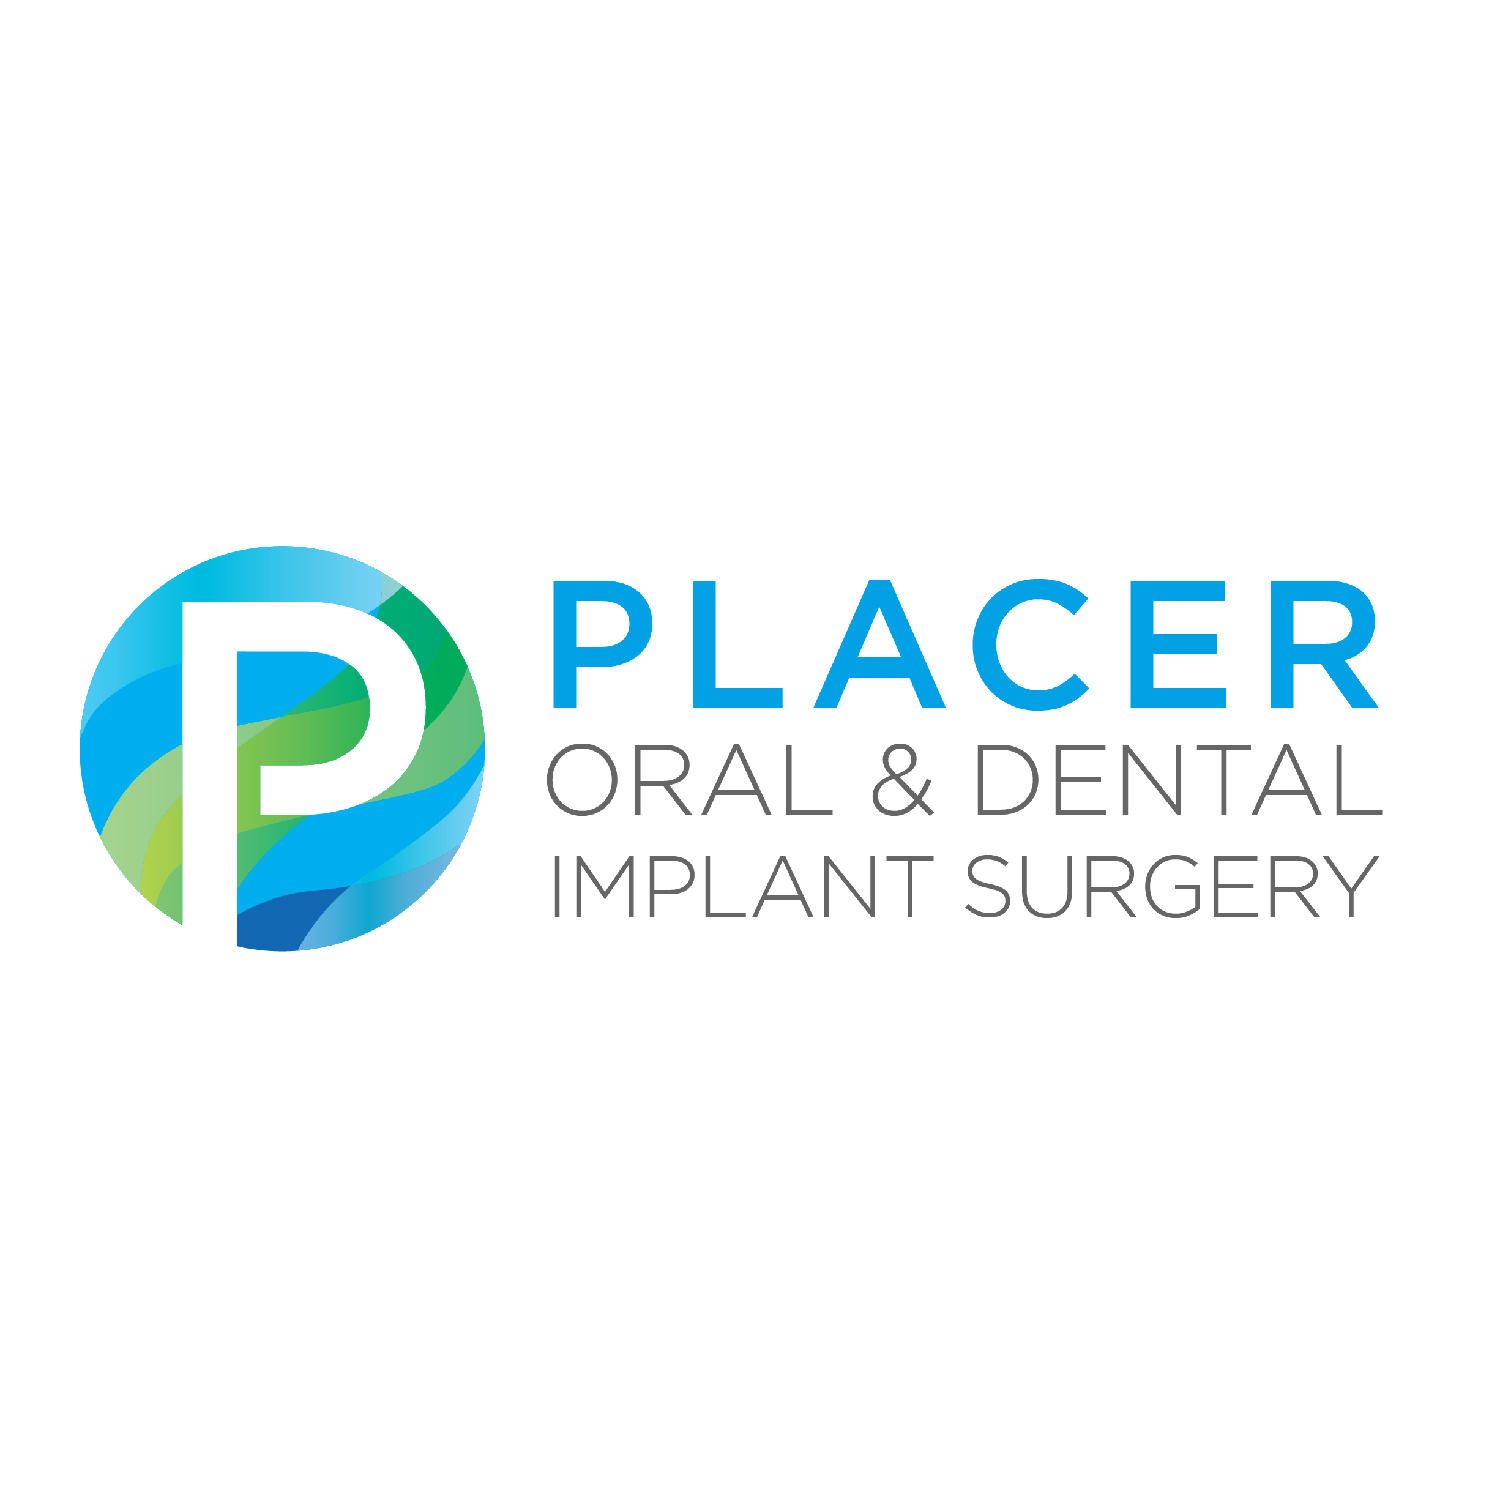 Placer Oral & Dental Implant Surgery Photo